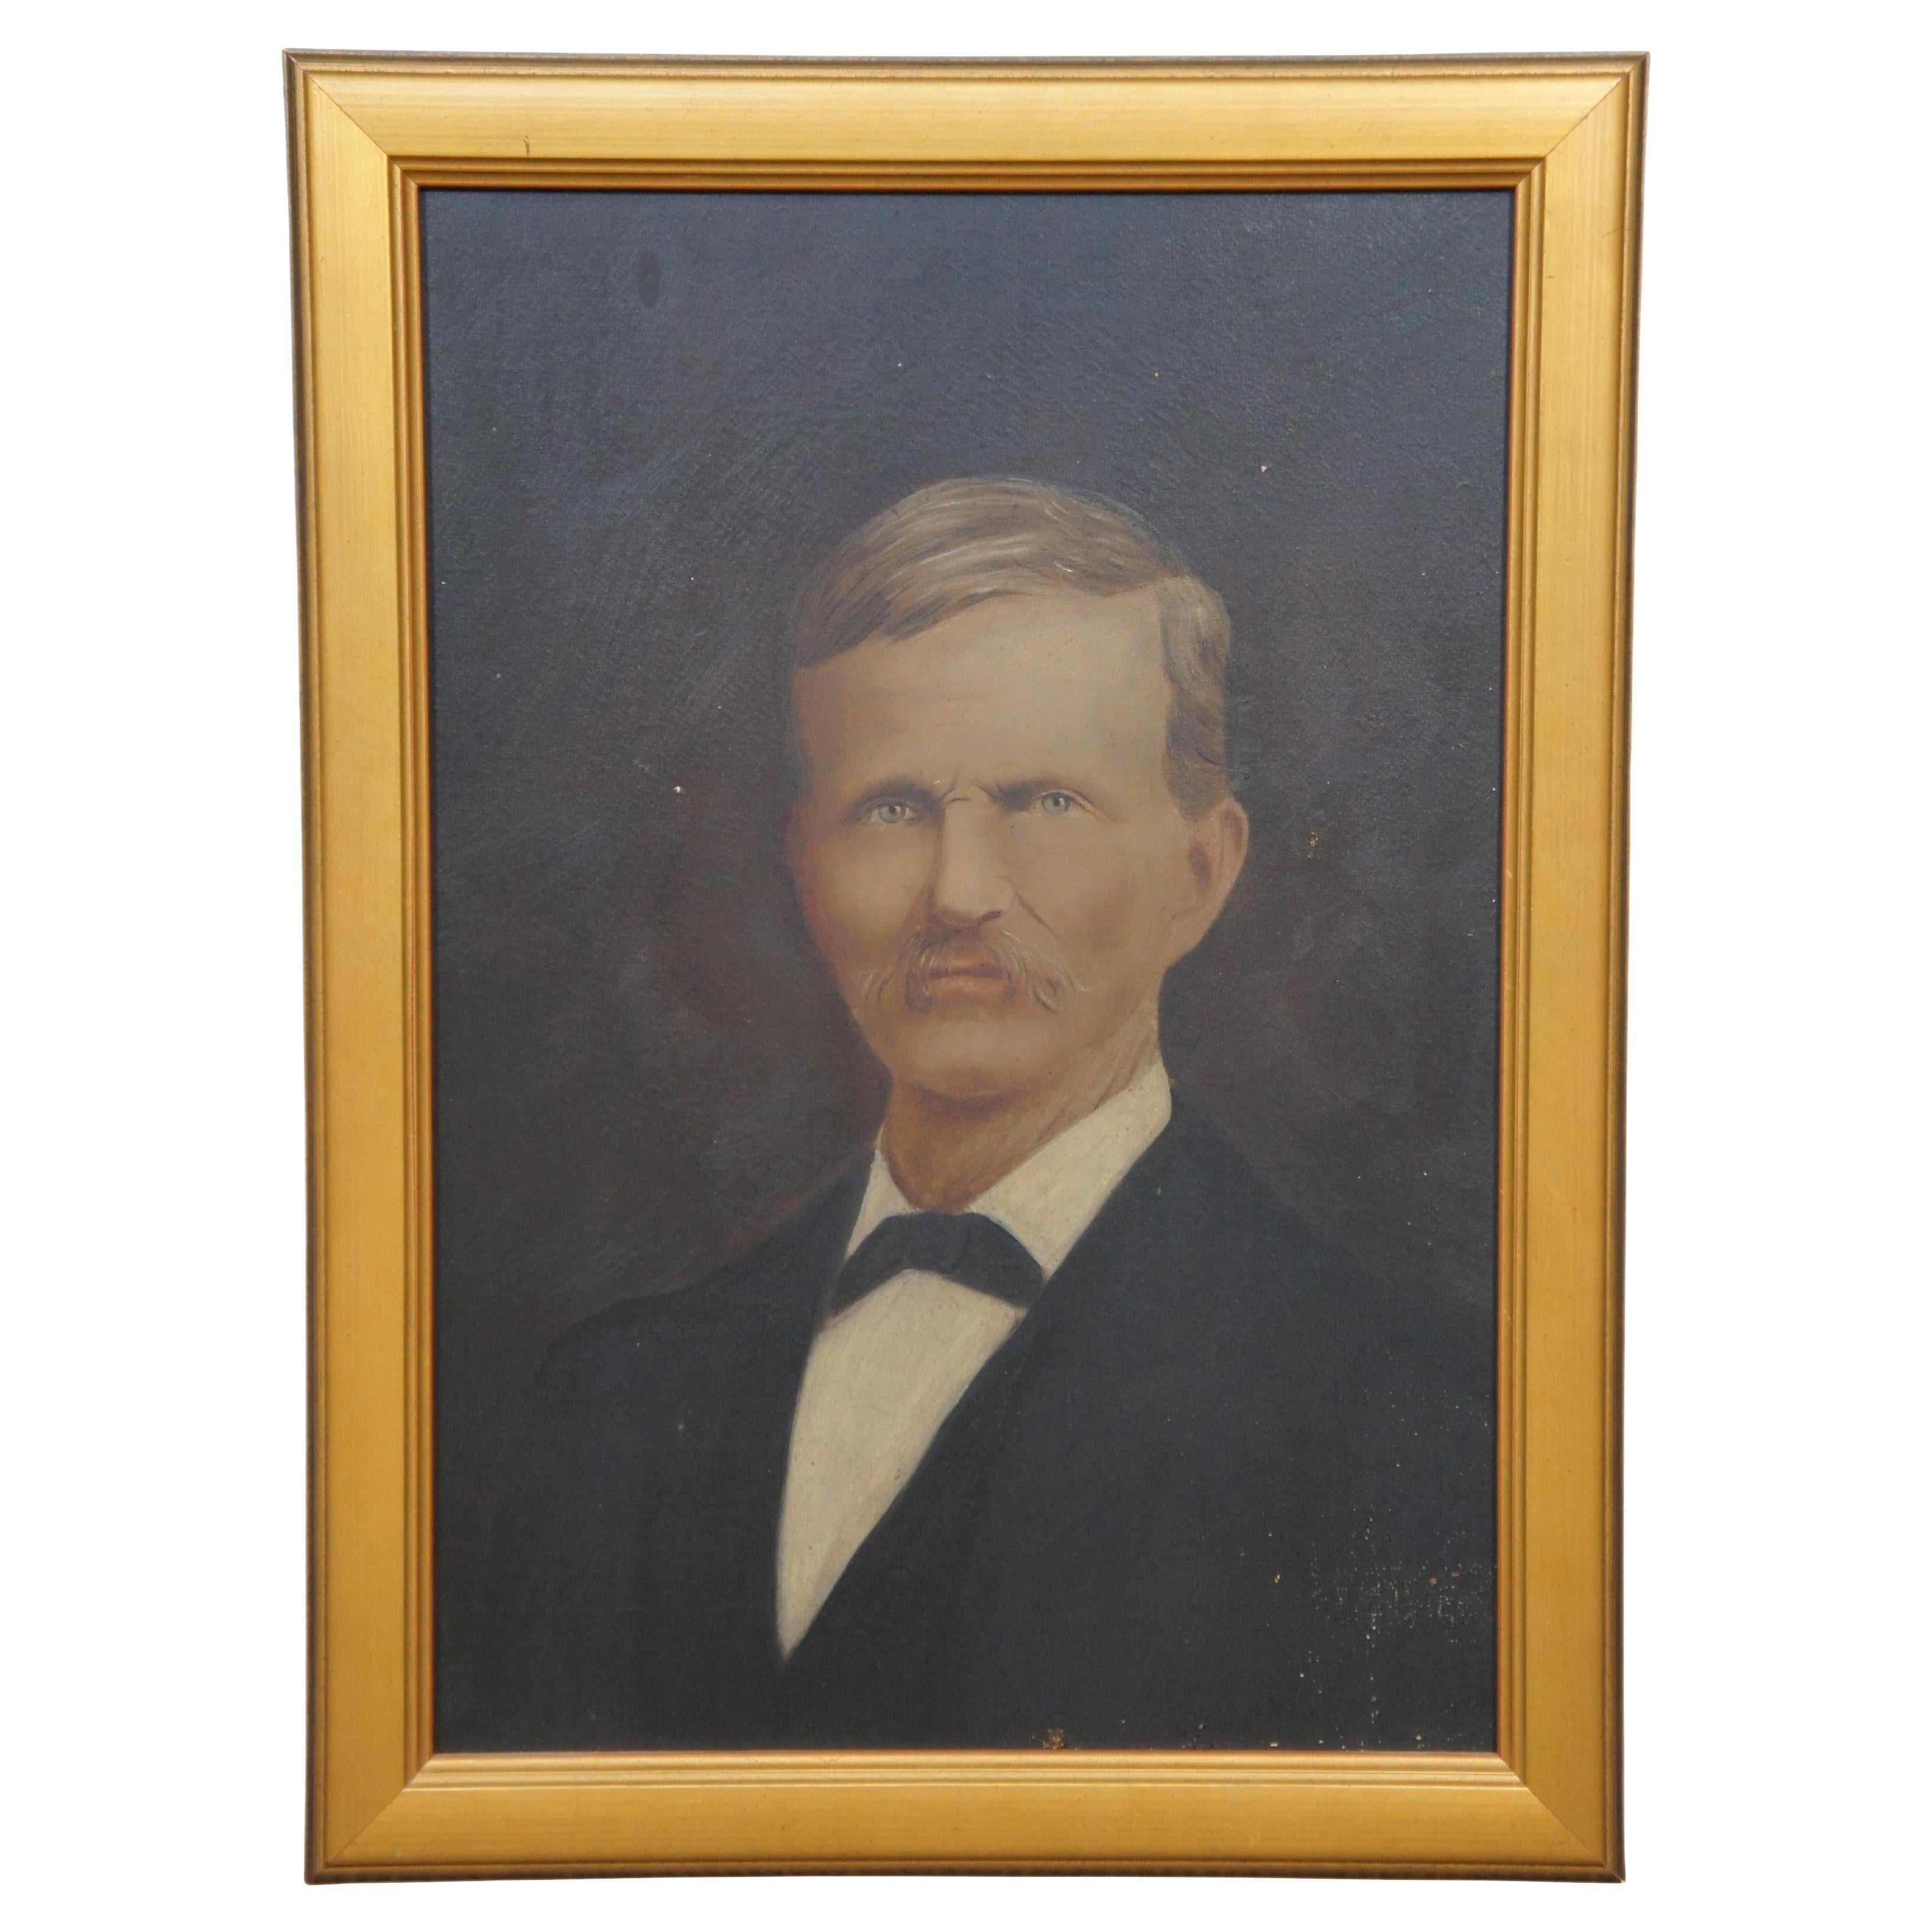 Antique Gentlemans Portrait Oil Painting on Board Man with Mustache 